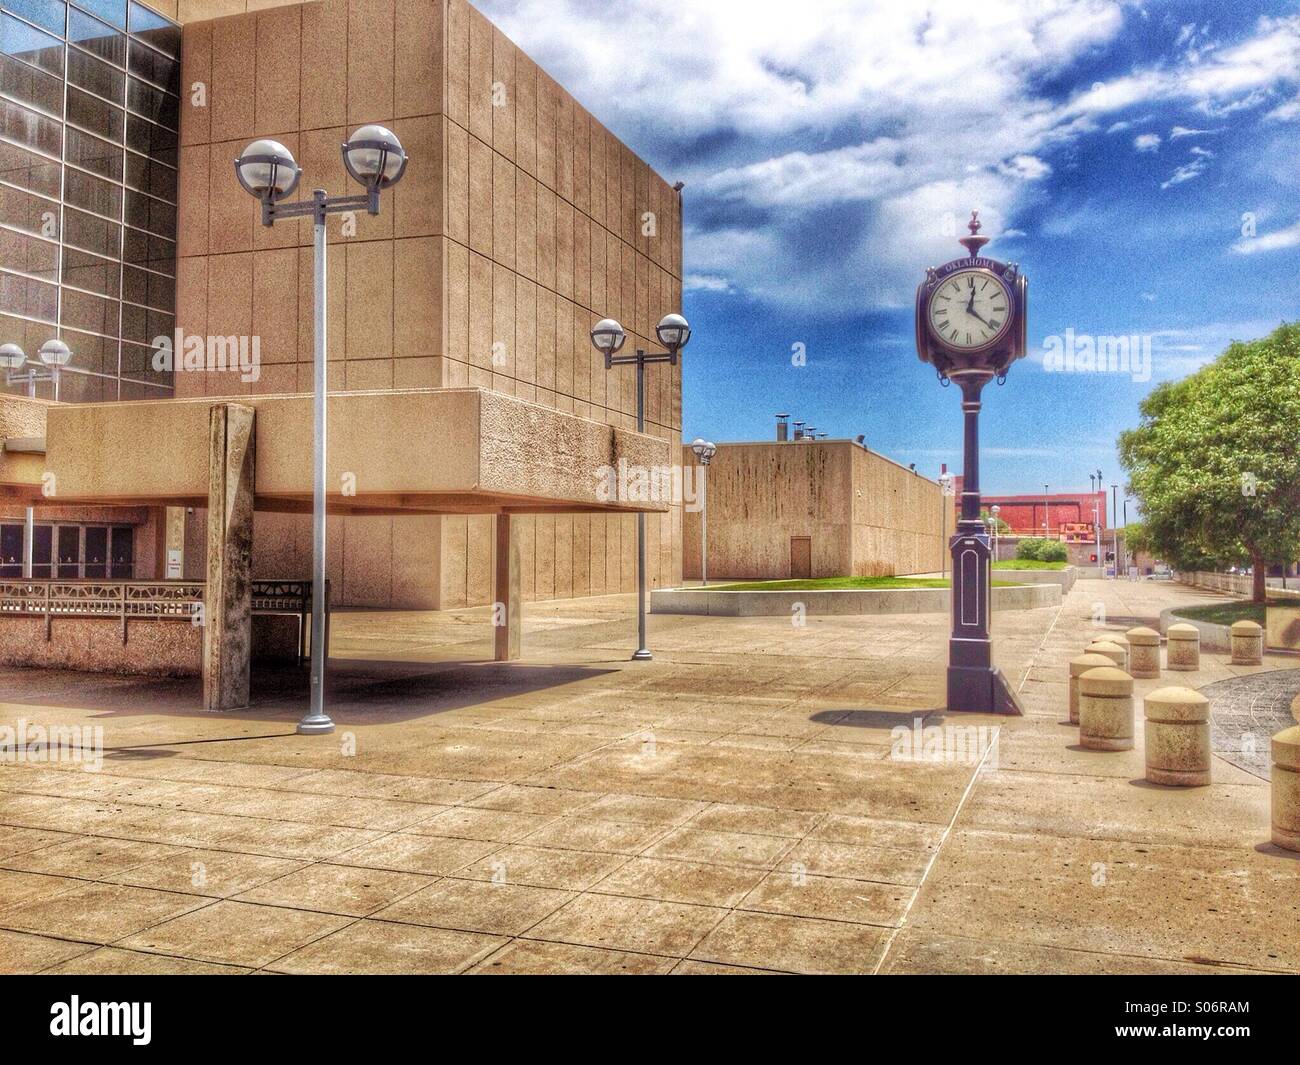 HDR image of Cox building including the street corner clock. Stock Photo